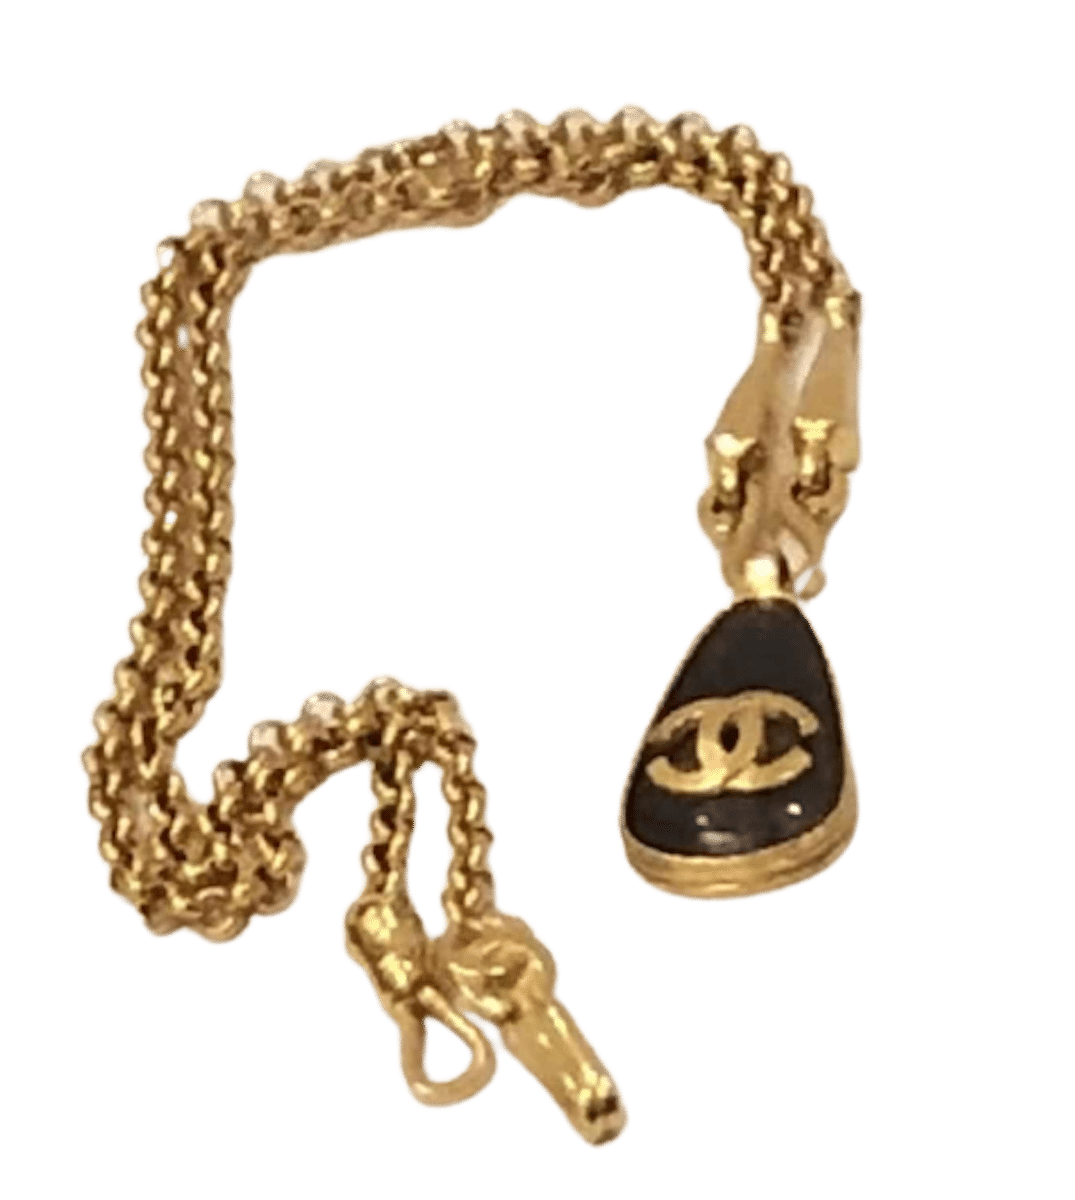 Chanel Pre-owned 1995 Clover-Pendant Chain Necklace